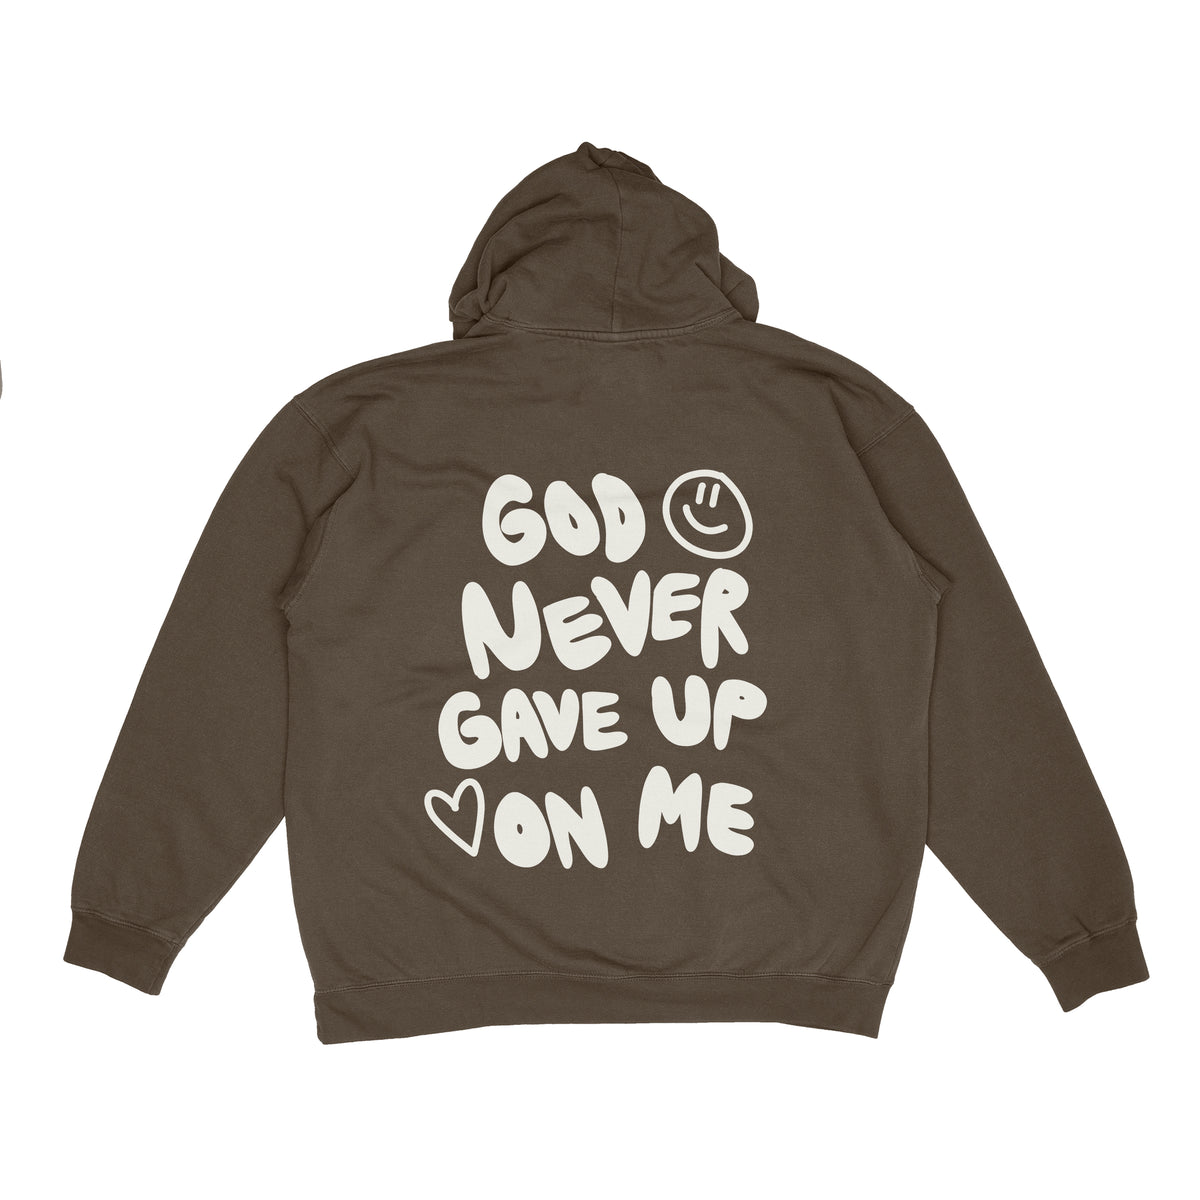 God Never Gave Up On Me - Hoodie